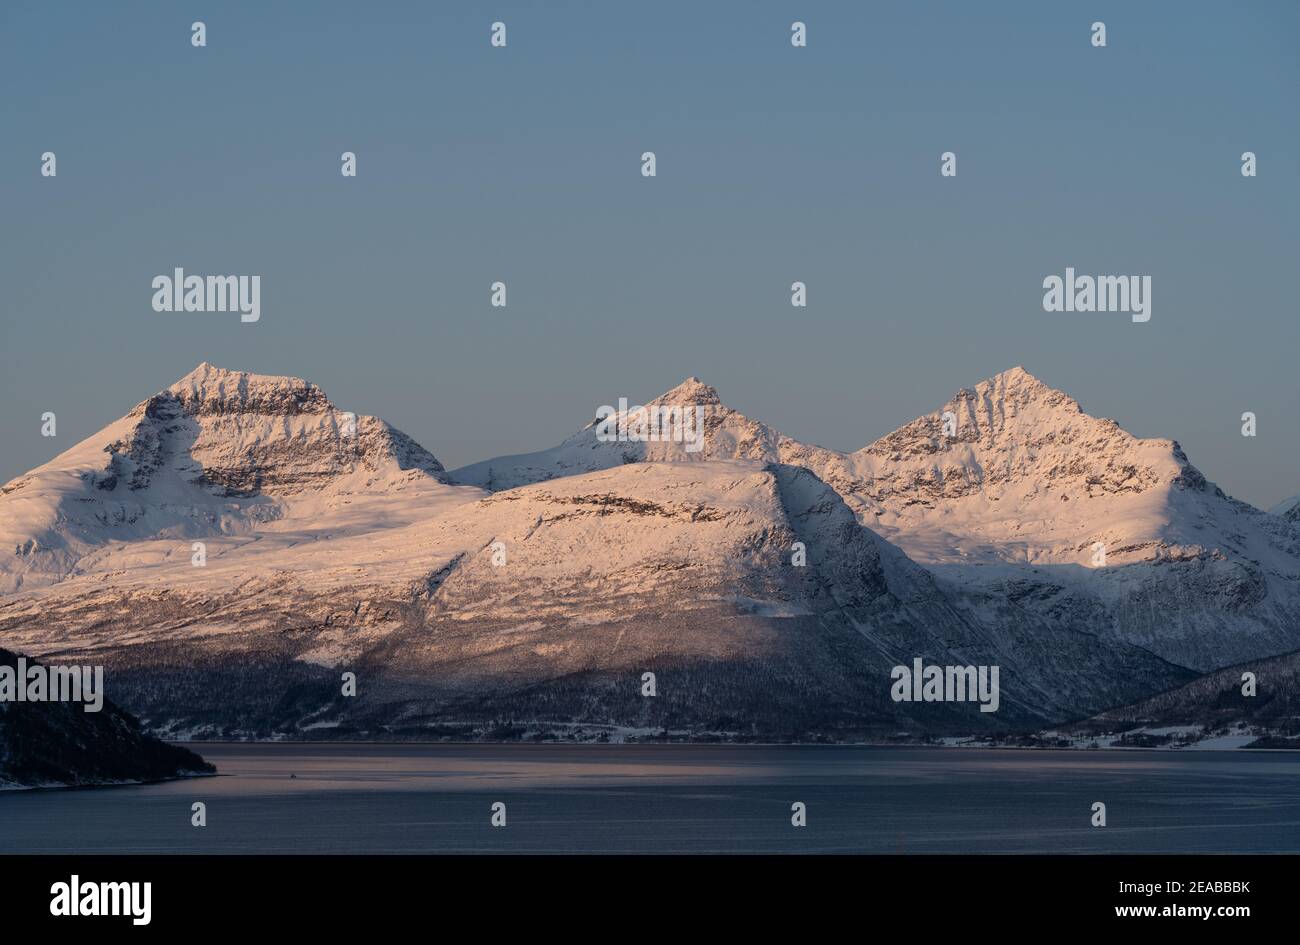 Norway, Nord-Norge, Winter, Mountain, Peaks, Sunset, Sky, Snow, Fjord, Sea Stock Photo